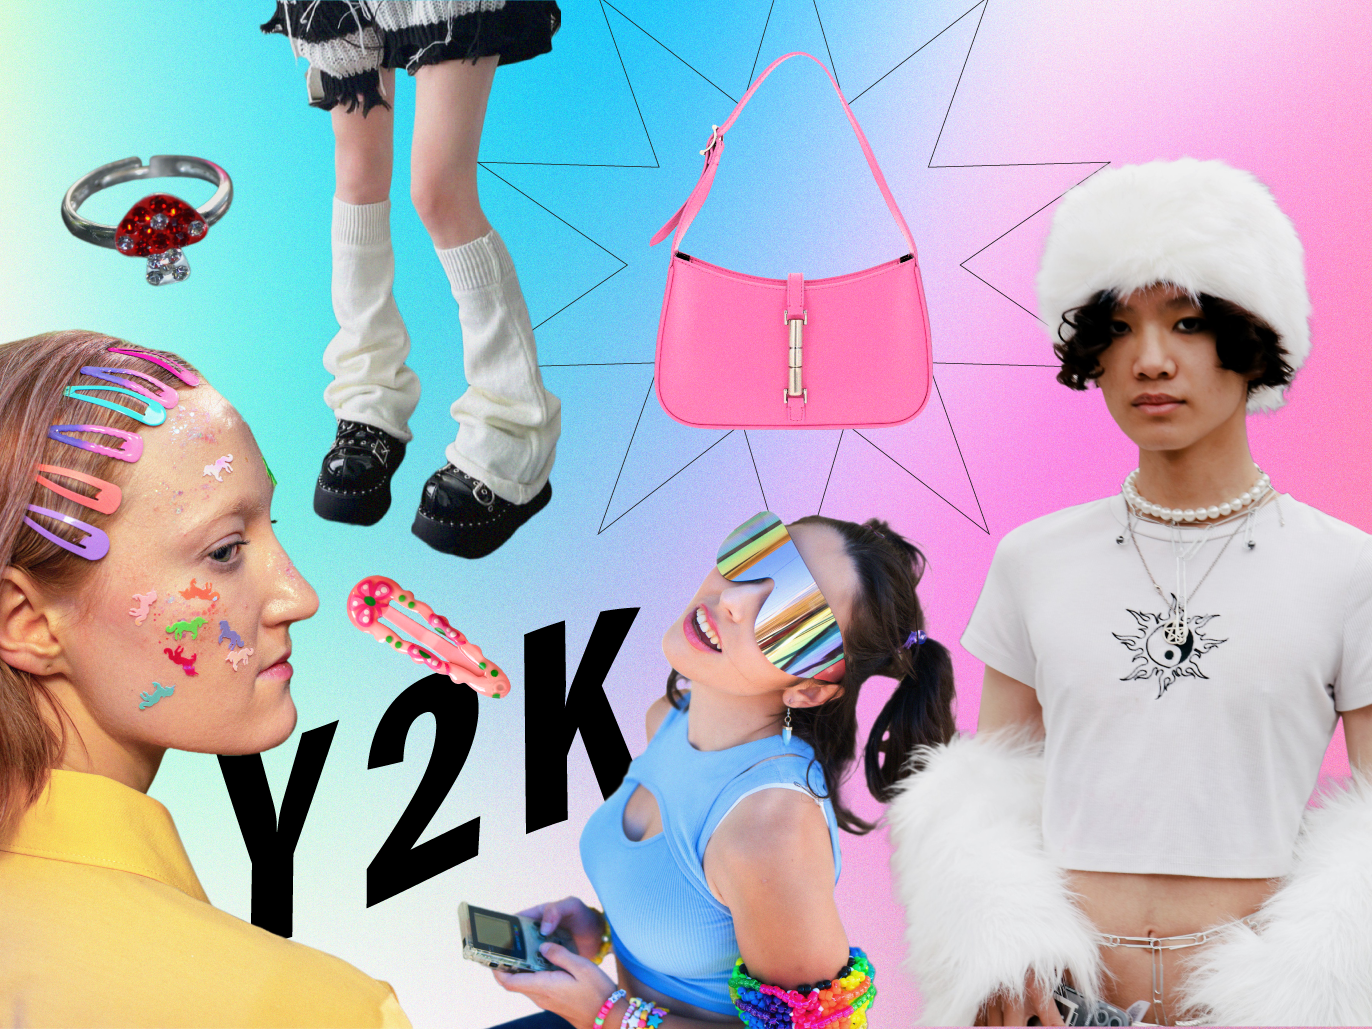 Y2K Fashion Is Back In 2021 Thanks To These 10 Brands